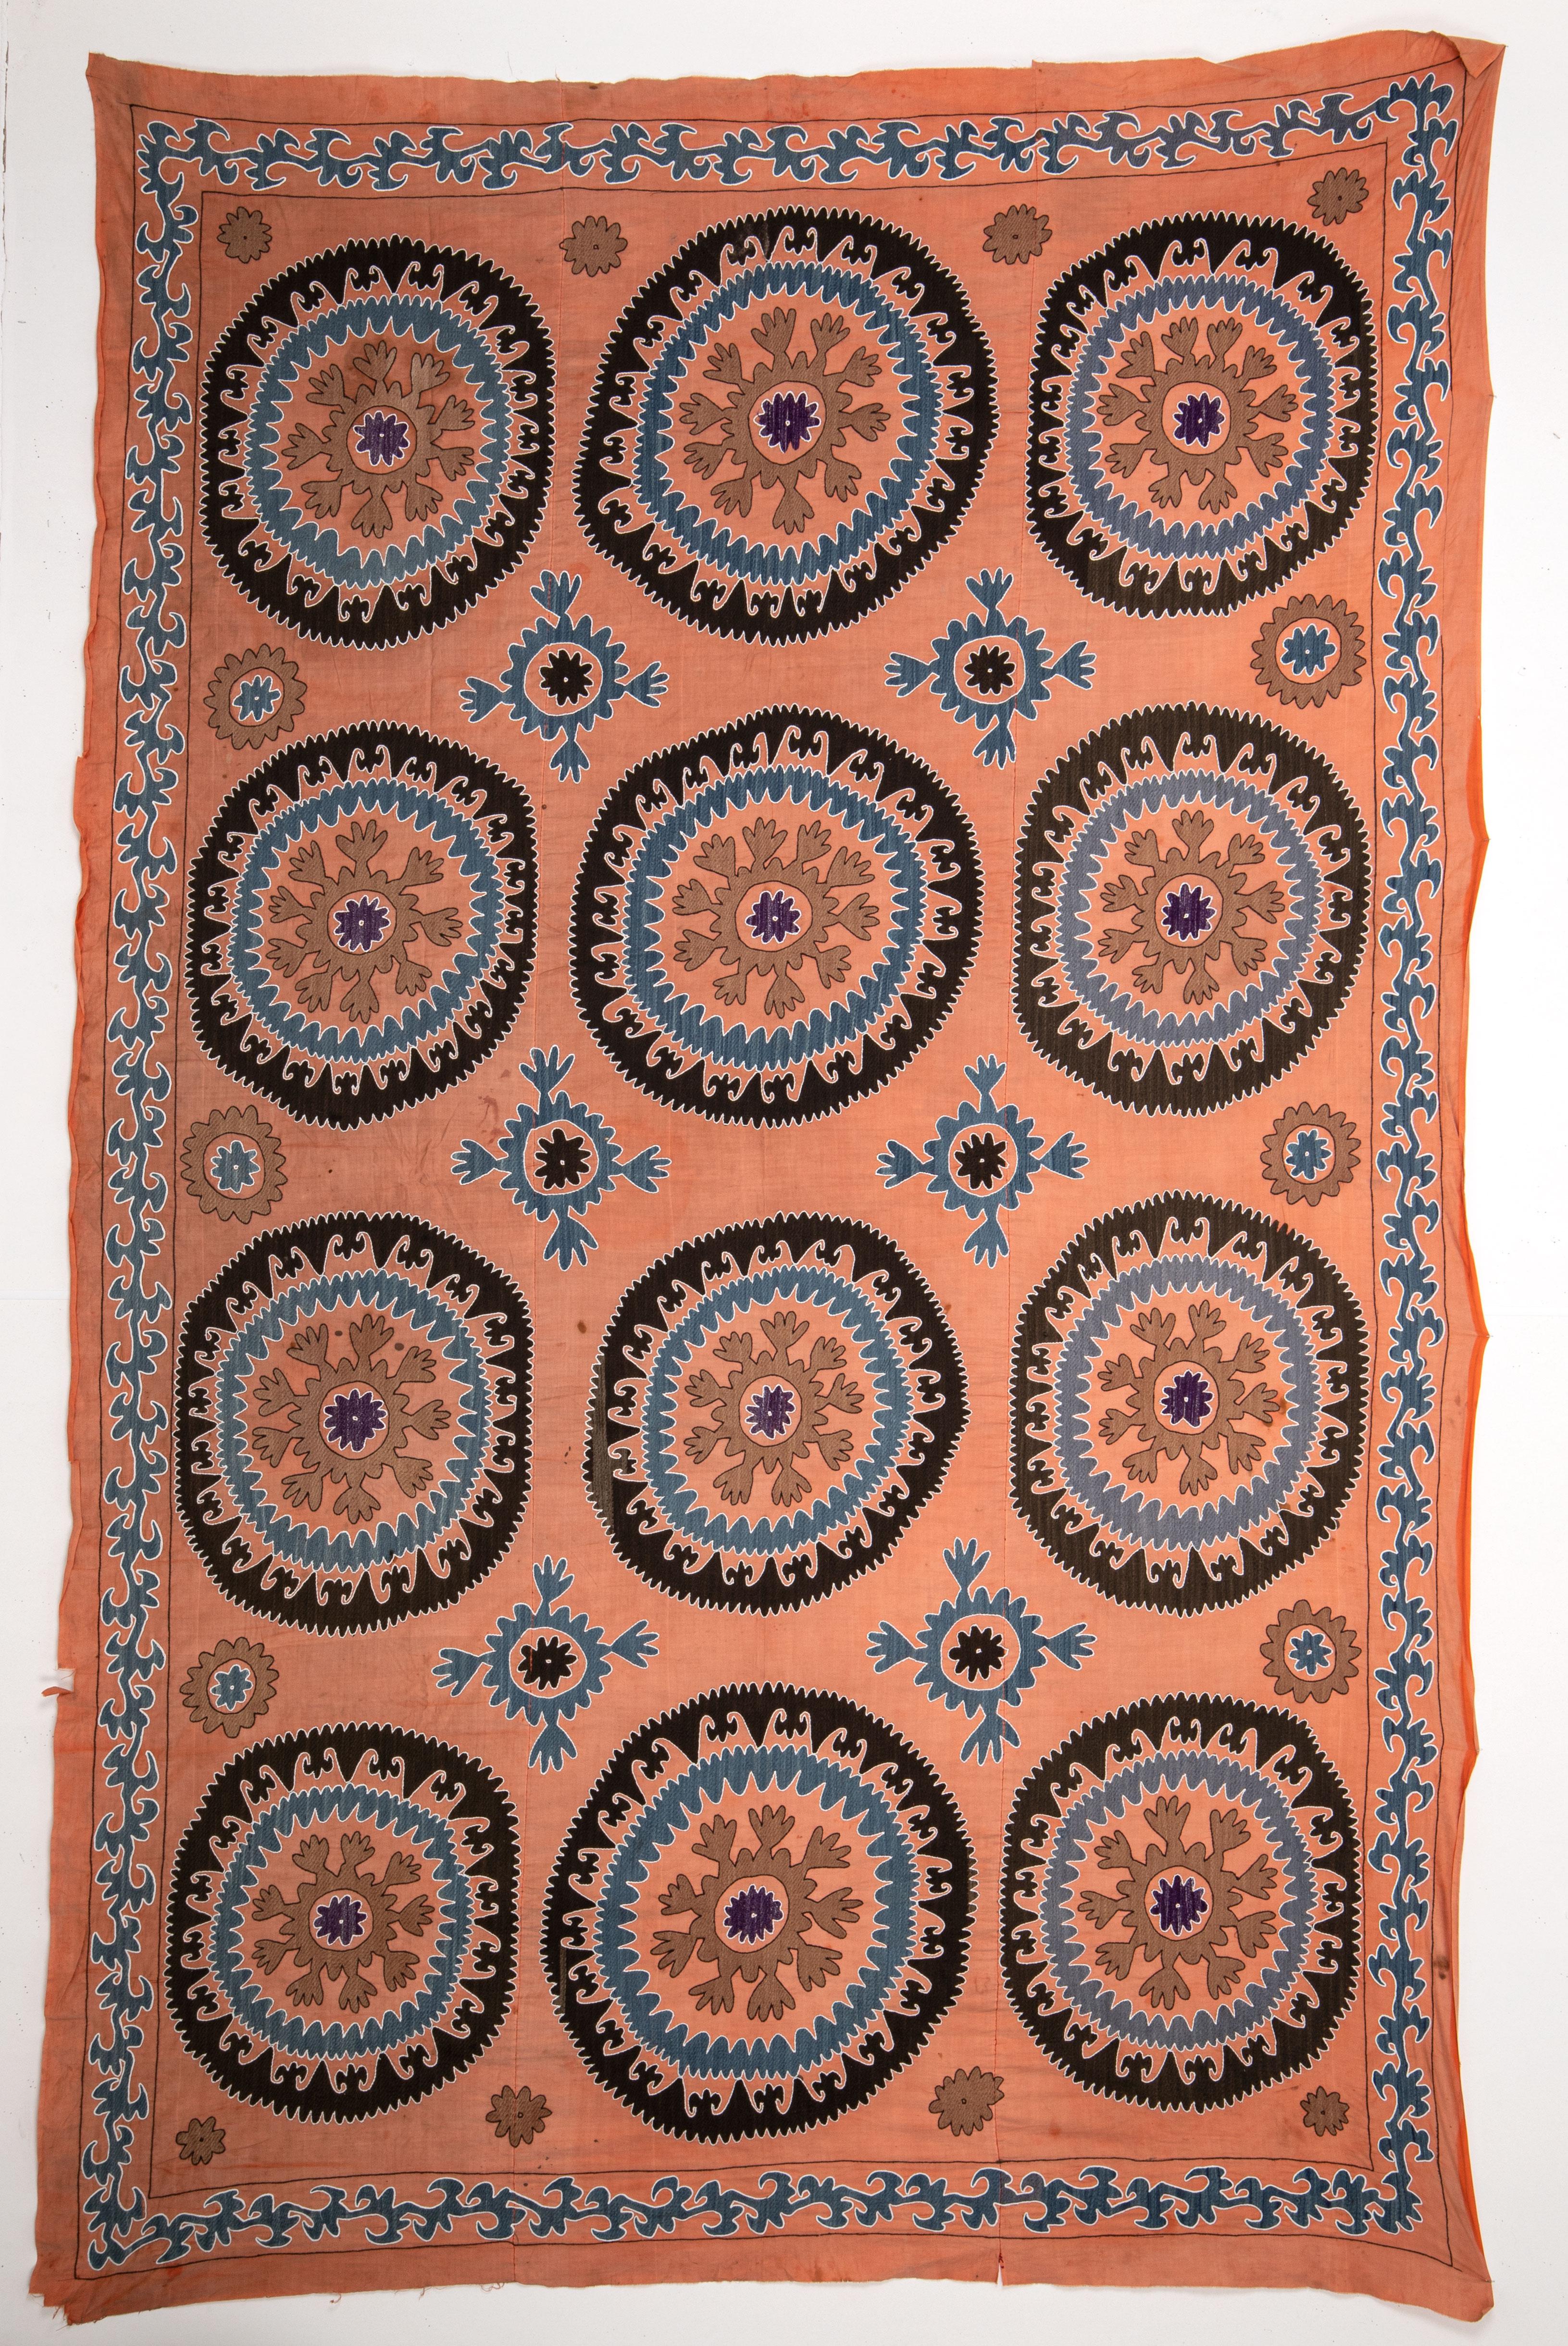 A suzani from Samarkand with an unusal background color. 1960s.